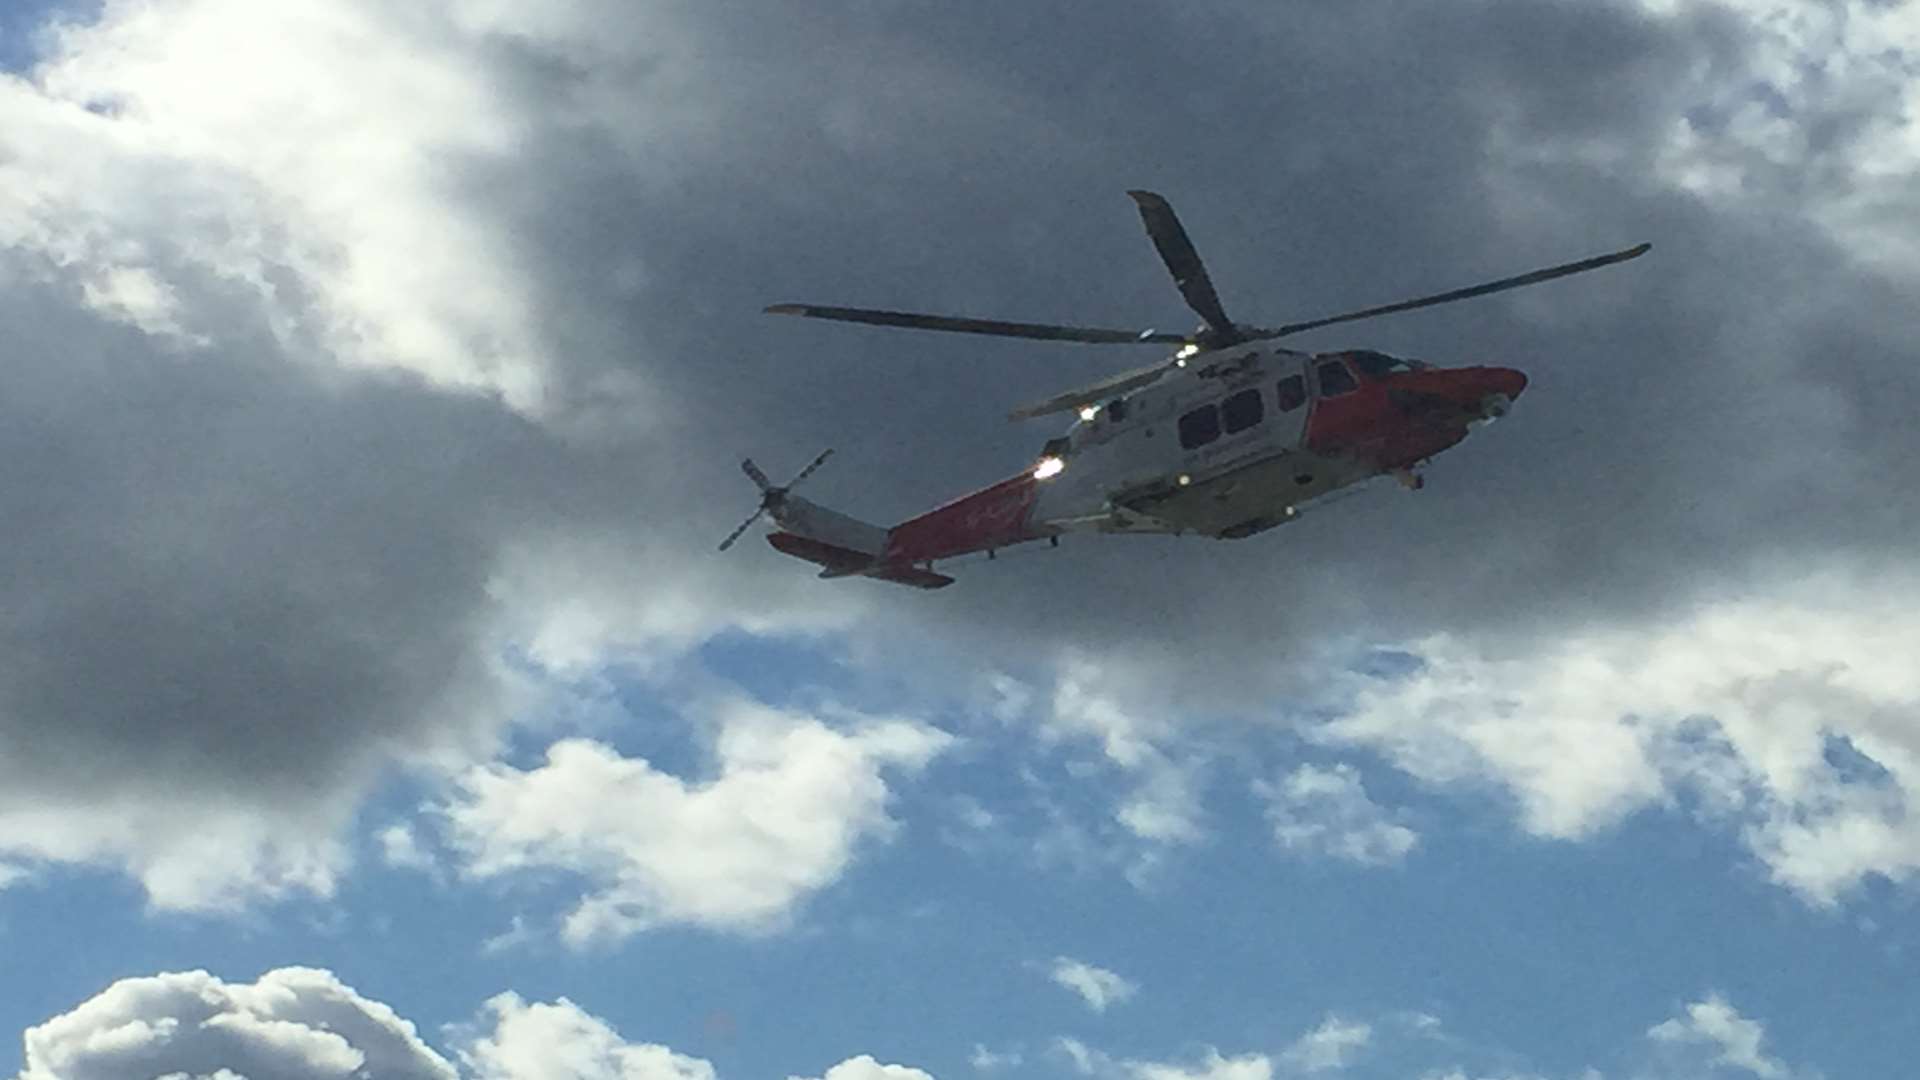 The Coastguard helicopter has been scrambled. Library image.